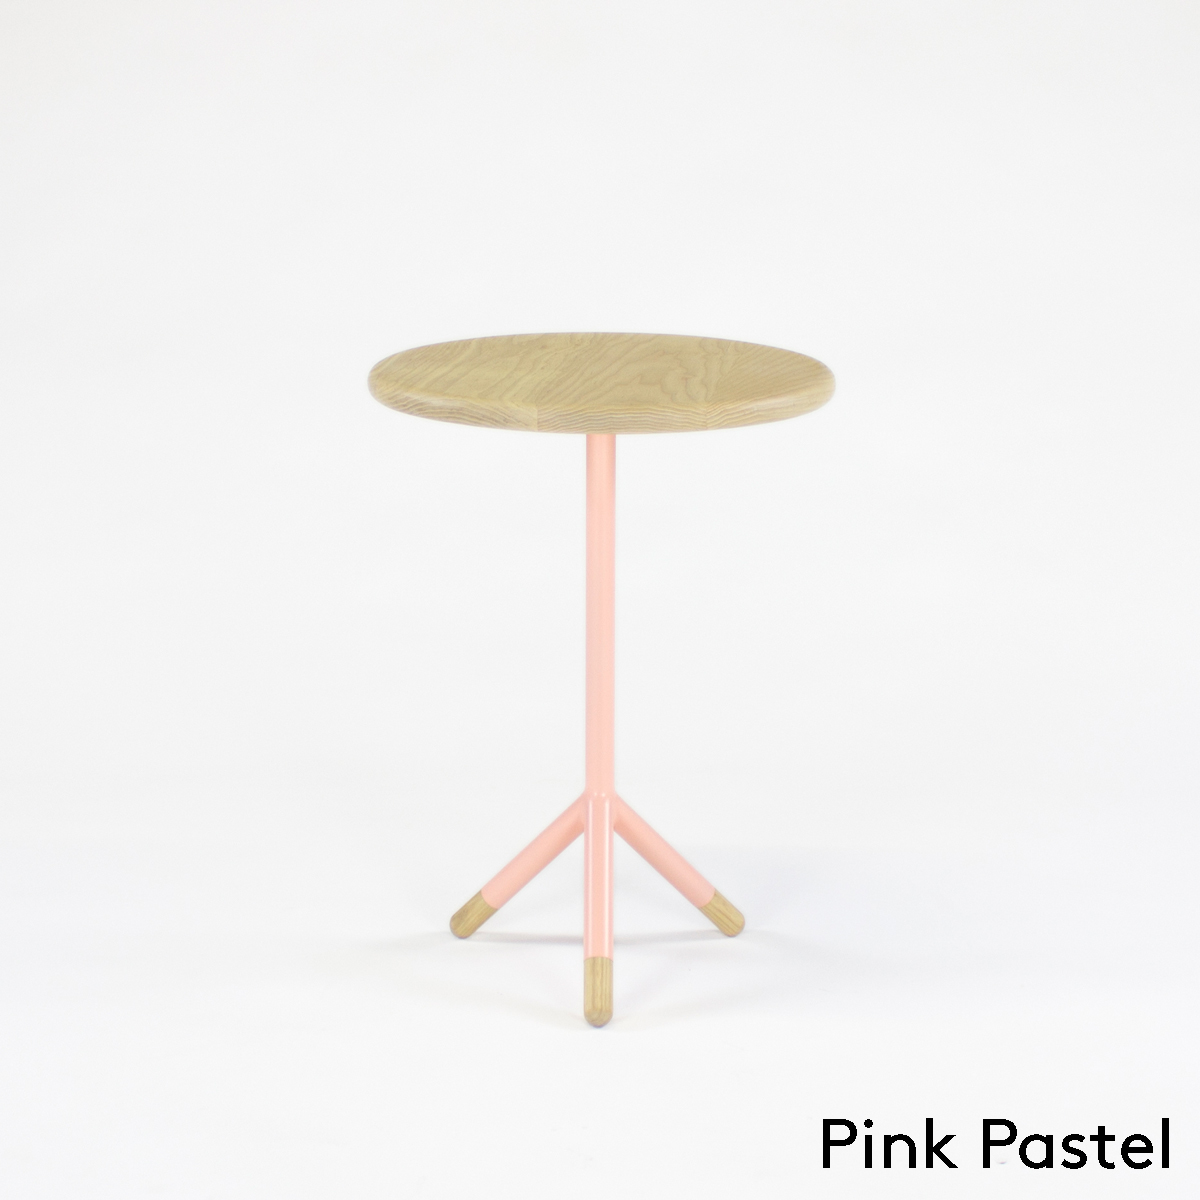 walcott accent table workof pink pastel metal this product cannot returned round coffee sets moroccan drum white wicker pier one nesting tables purple tiffany lamp nightstands